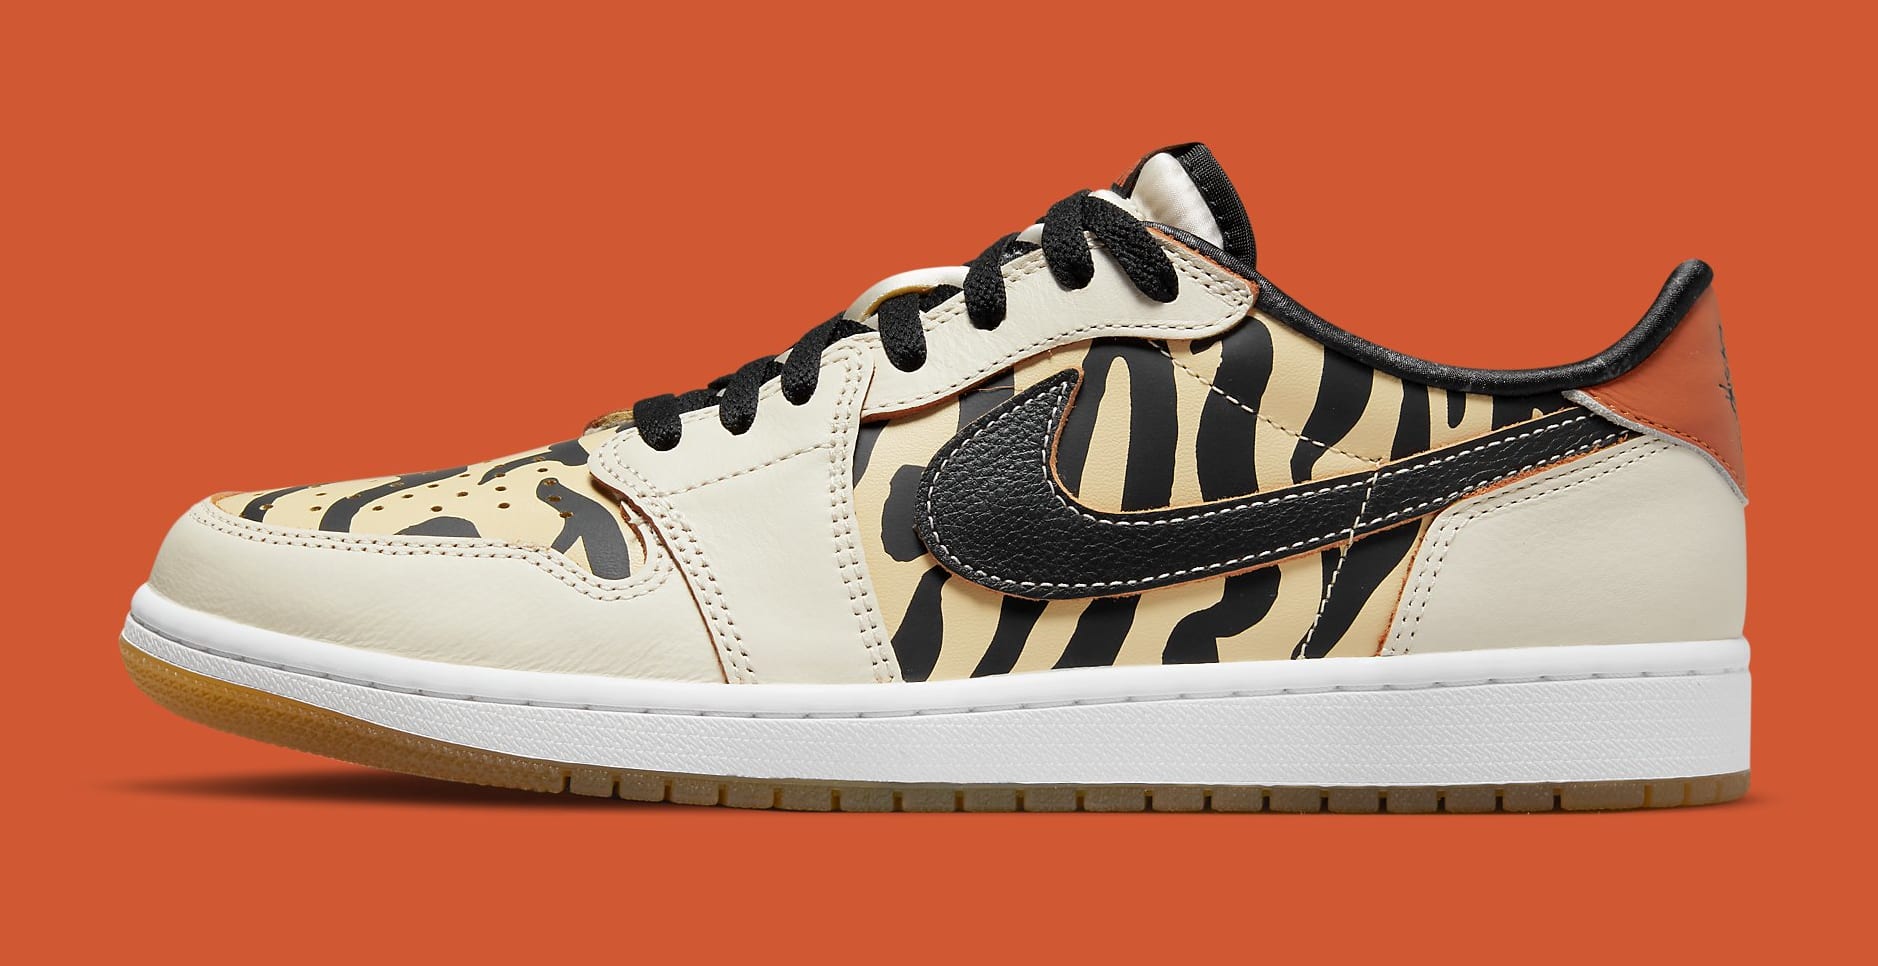 Air Jordan 1 Low 'Year of the Tiger' DH6932 100 Lateral